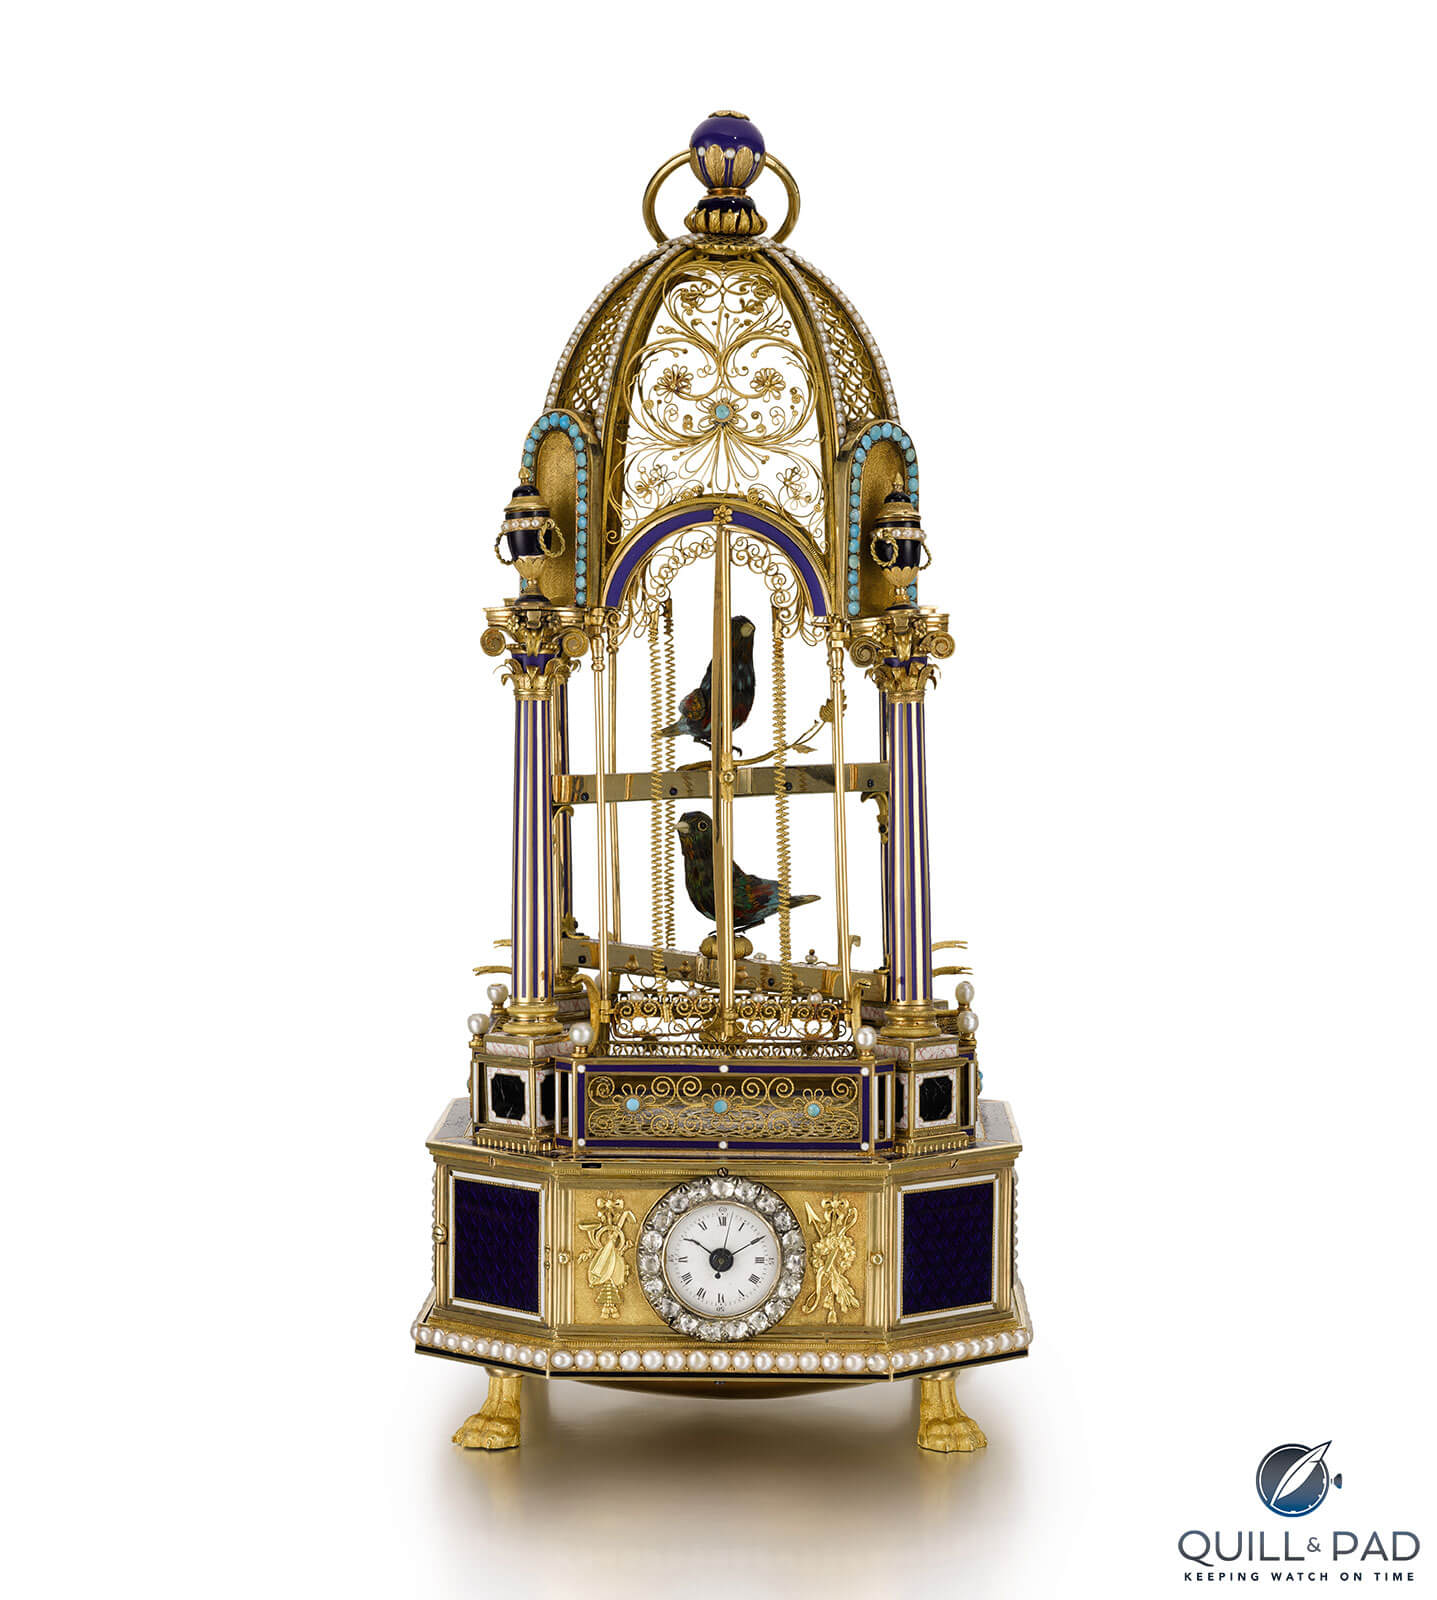 PART 2 2002 superb timepieces! Sotheby's MASTERPIECES FROM THE TIME MUSEUM 